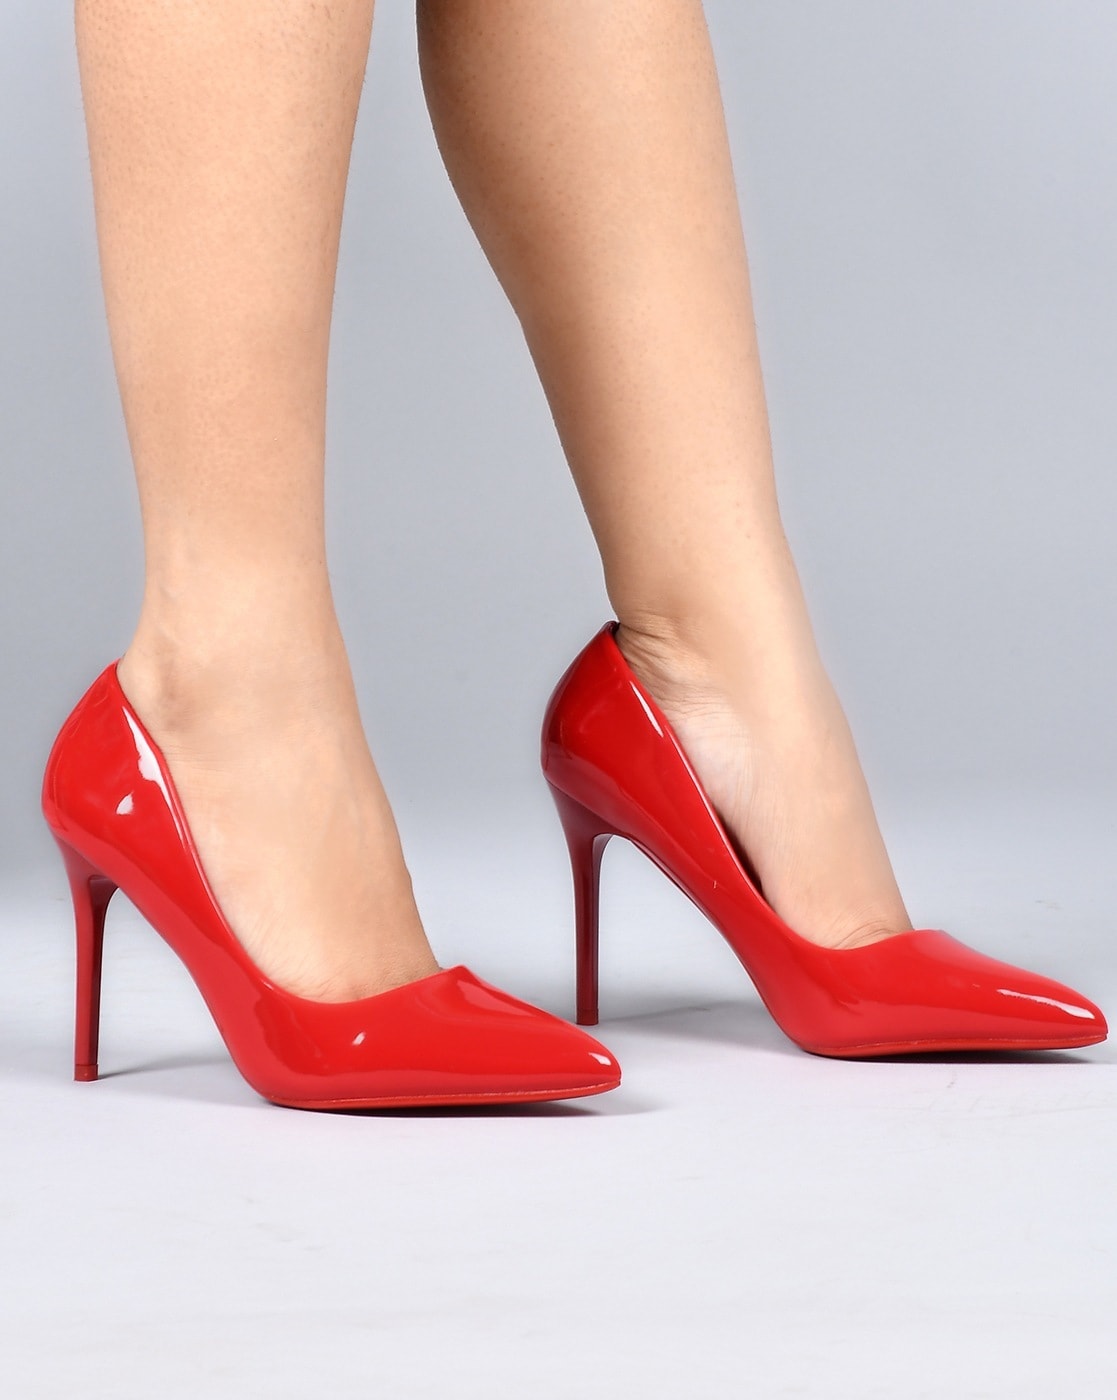 Woman Wearing Red Sexy High Heels Photograph by Maxim Images Exquisite  Prints - Pixels